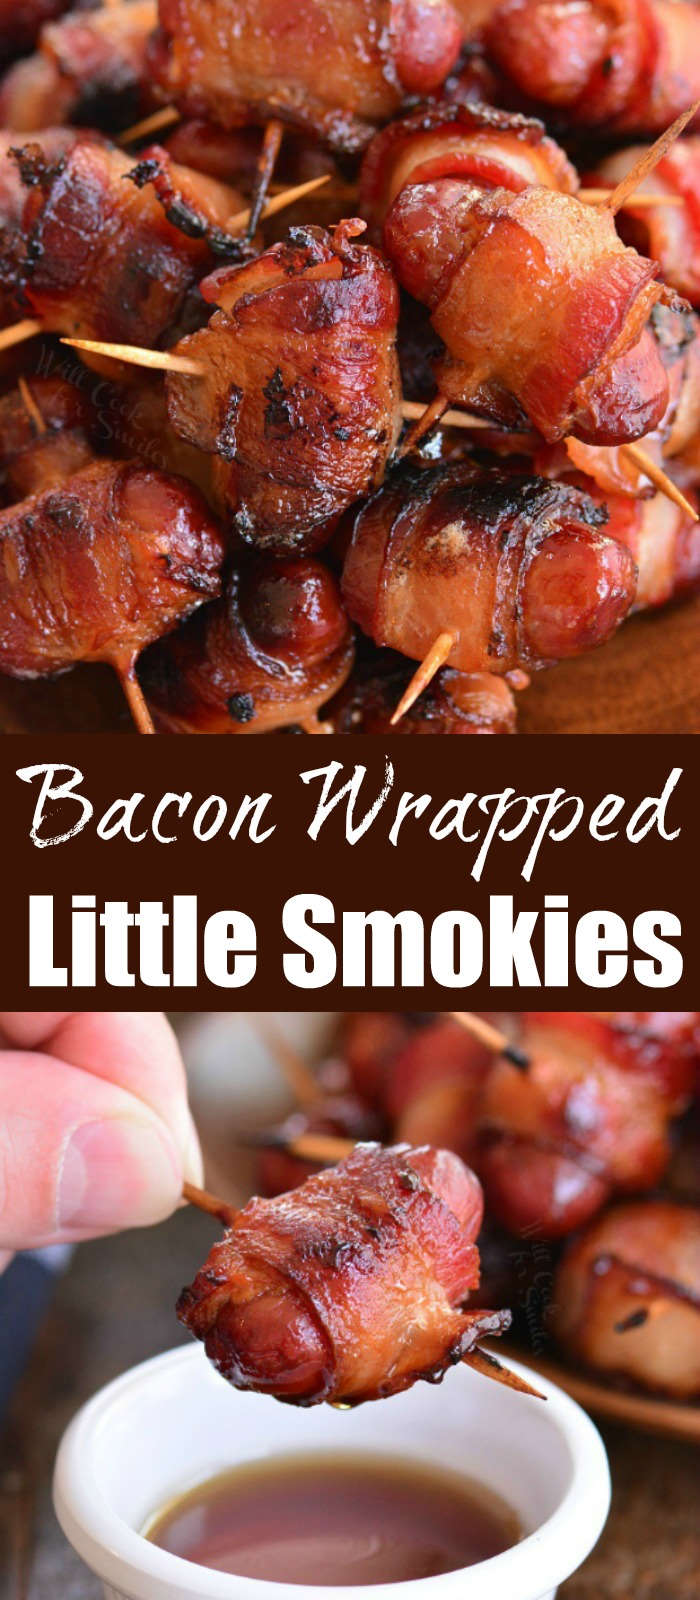 bacon wrapped little smokies collage